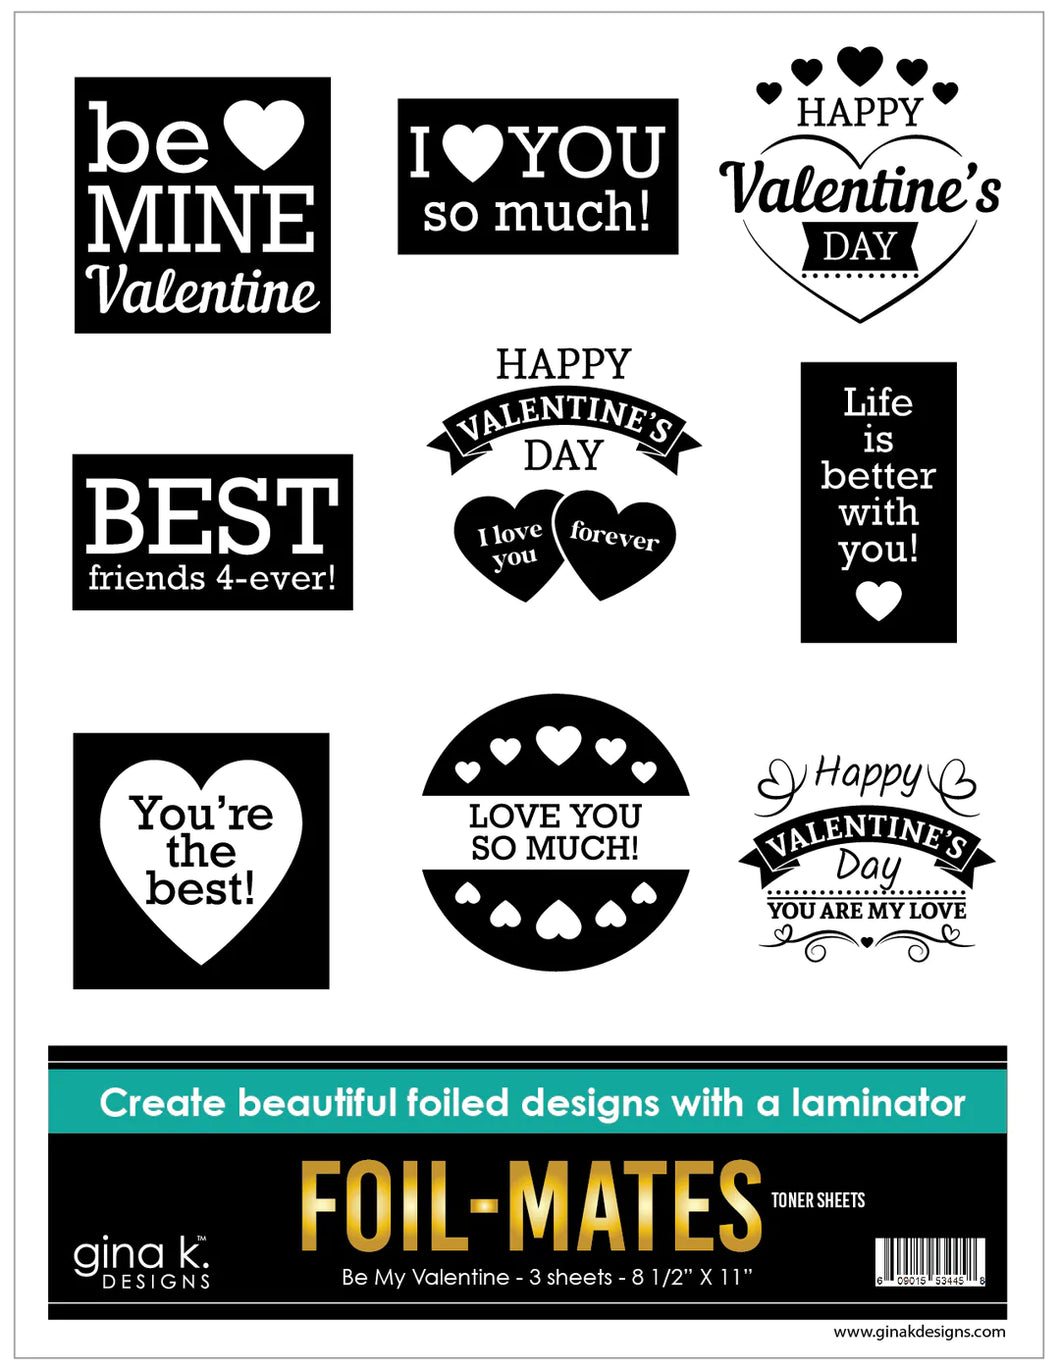 <p>Gina K. Designs - Foil-mates Toner Sheets - Be My Valentine. These foil able elements are printed with toner to be used with the Gina K Designs Fuse Foiling System or other hot laminator products. Available at Embellish Away located in Bowmanville Ontario Canada.